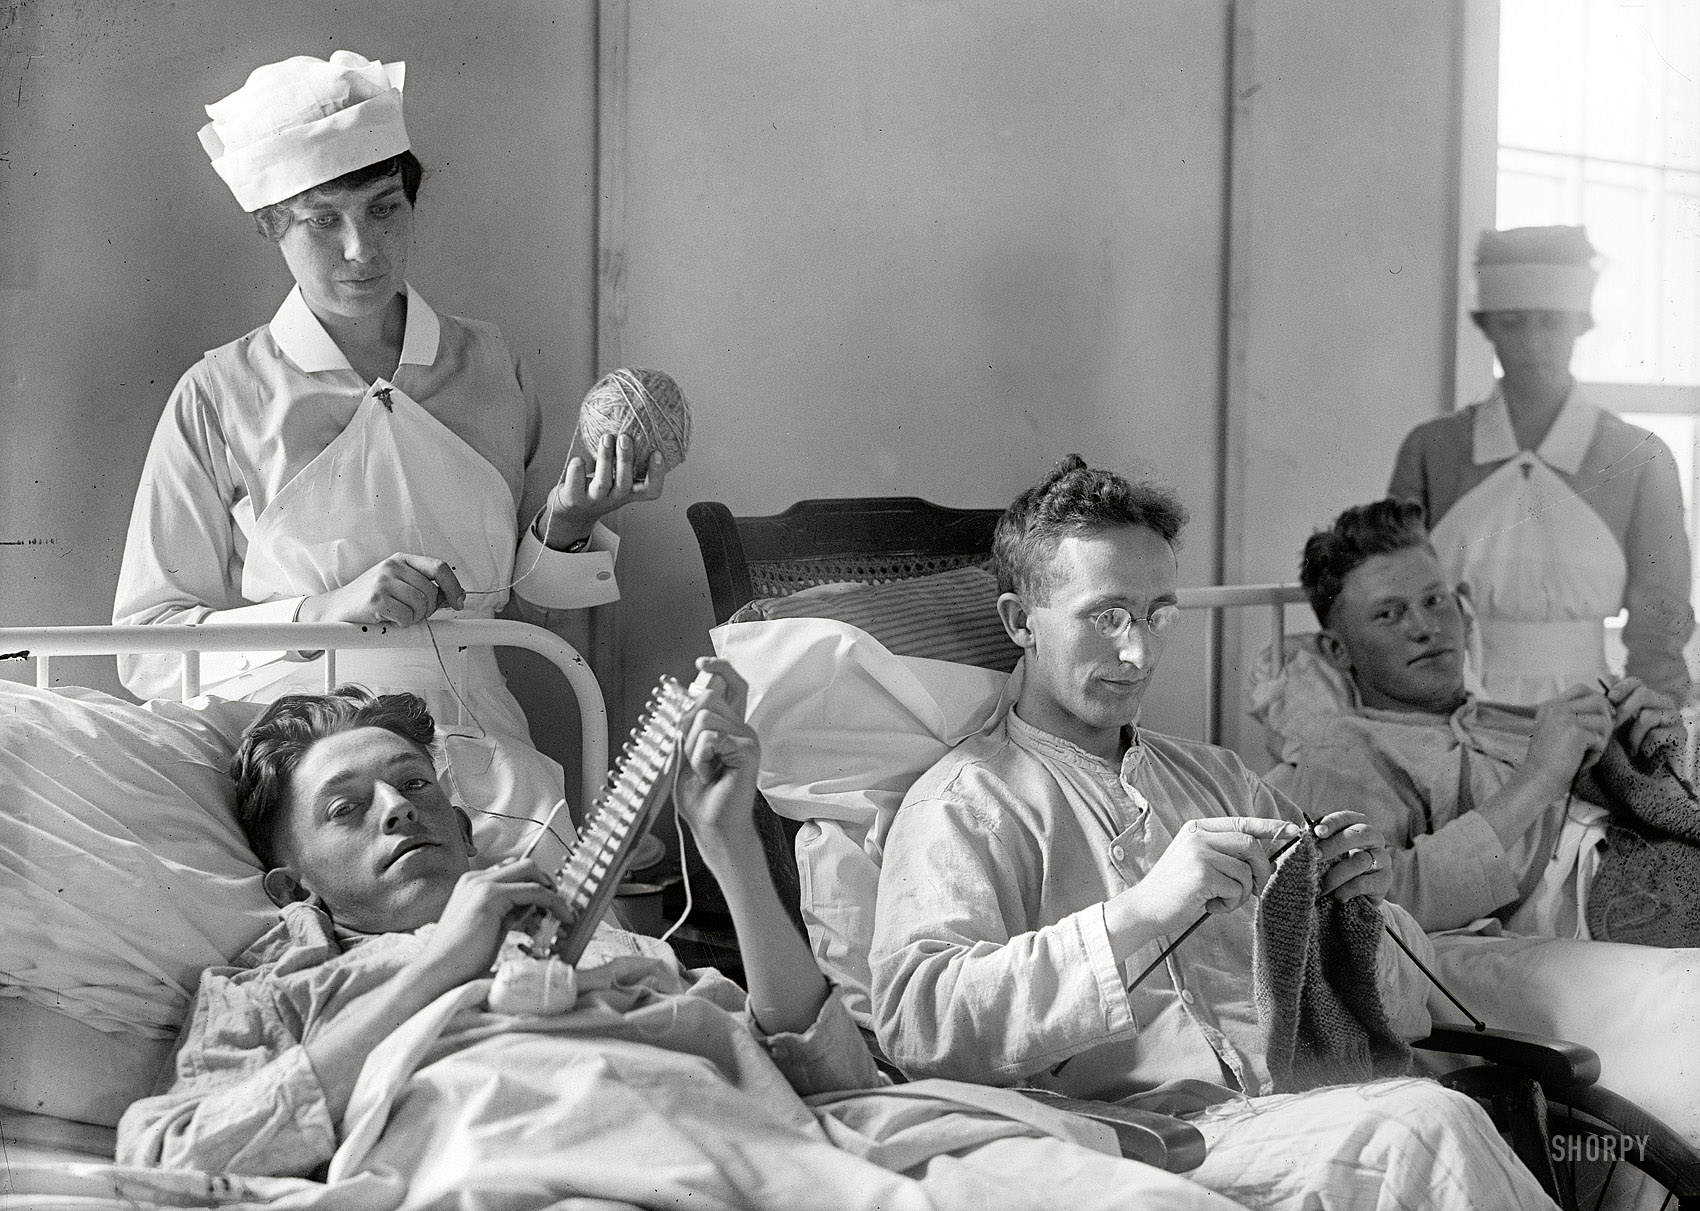 Washington, D.C., circa 1918. "Soldiers at Walter Reed." Harris & Ewing Collection dry-plate glass negative. View full size.